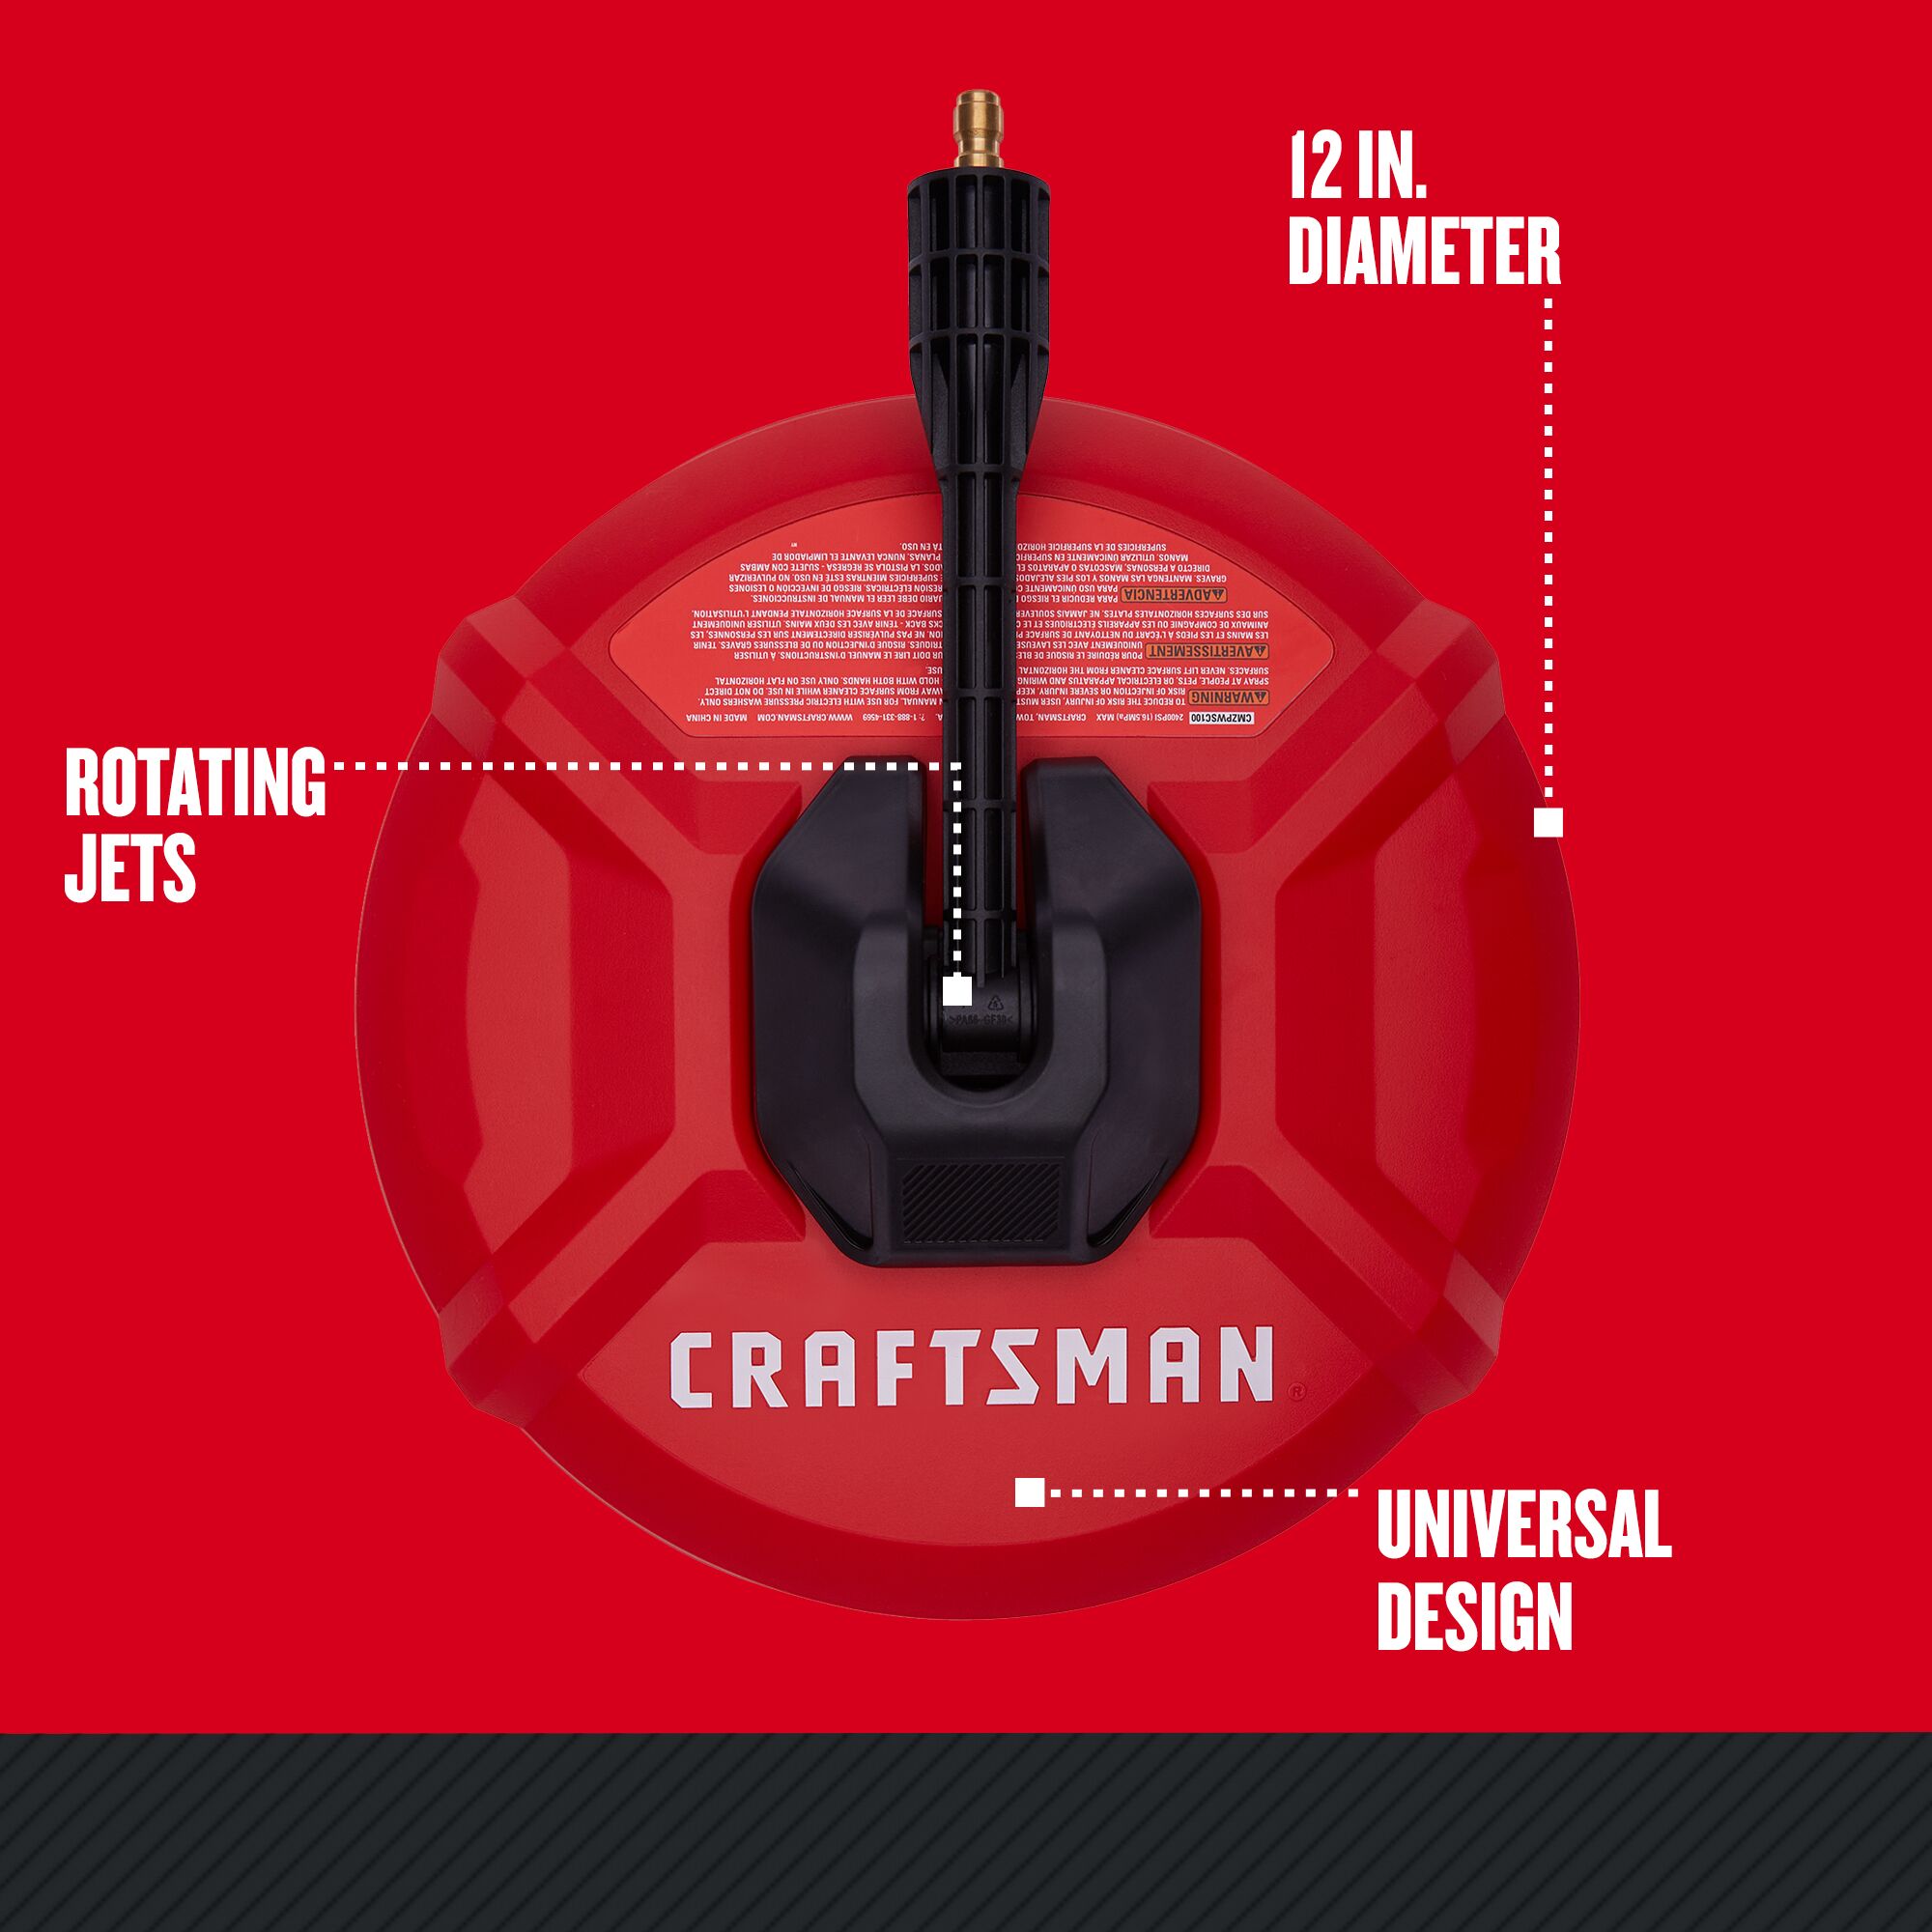 Graphic of CRAFTSMAN Accessories: Blowers, Trimmers & Edgers highlighting product features